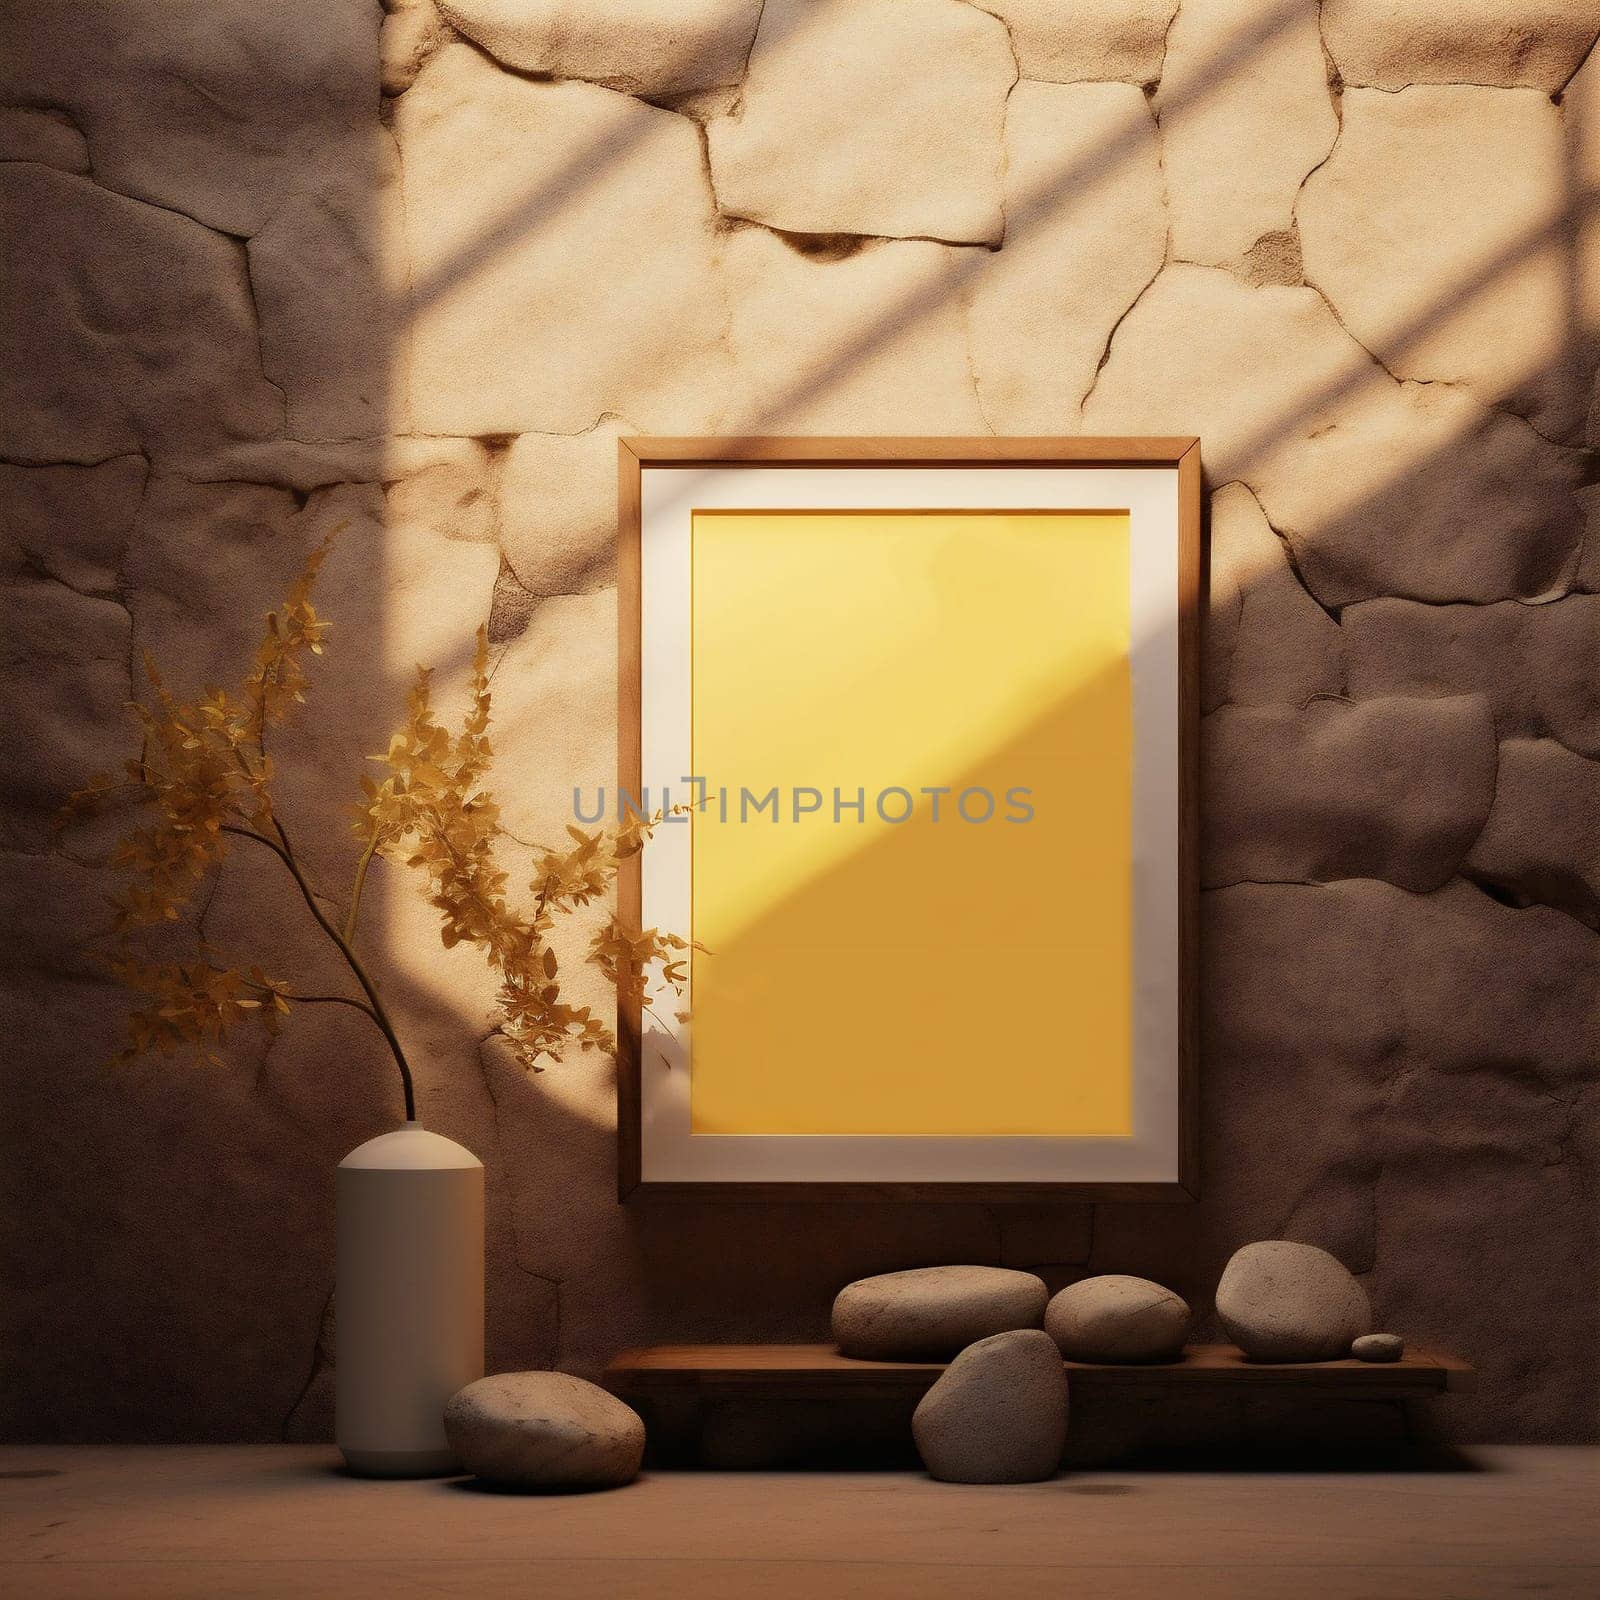 Poster Frame Design Ttemplate for Exhibition or Advertising. Picture Frame Mock Up on Brick Wall. Mockup Poster Frame with Ethnic Decor Close up in Loft Interior. Boho Beige Livingroom with Plant, Stones and Picture Frame Background.